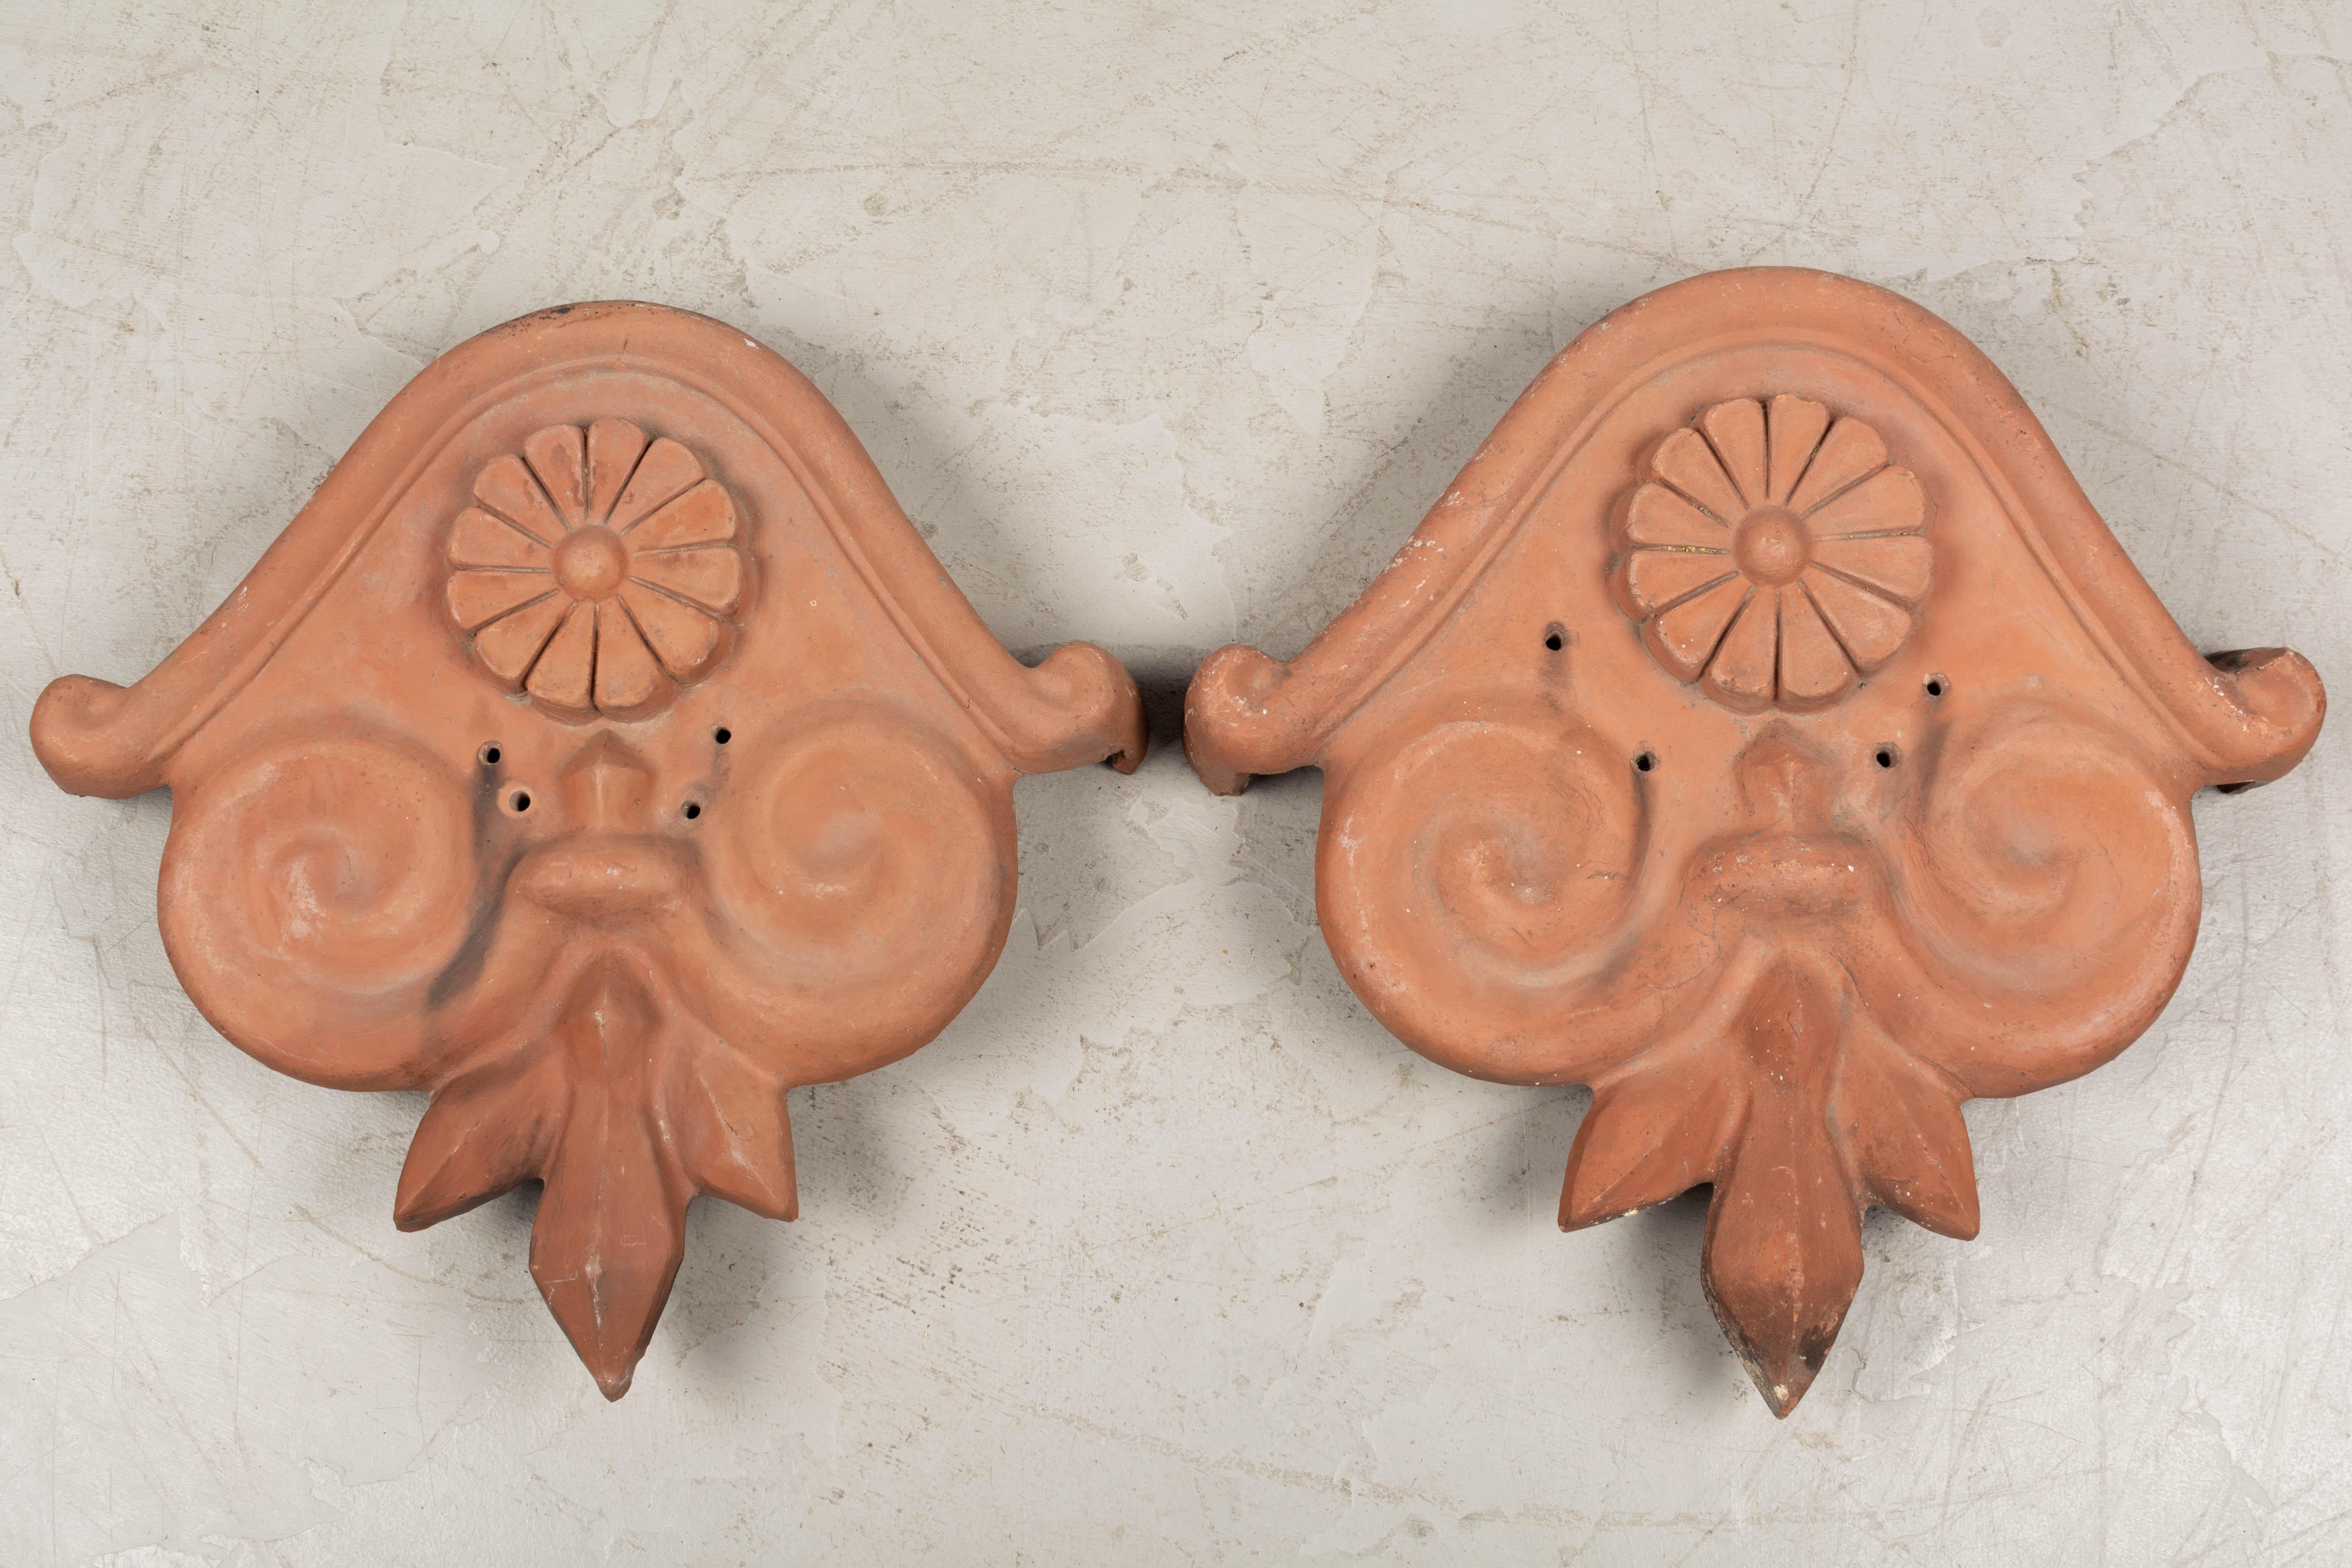 A pair of French terracotta architectural roof decoration. These salvaged architectural ornaments were used to CAP the peak of a traditional sloped terracotta tiled roof. In very good condition. Excellent for use as sculptural elements in the